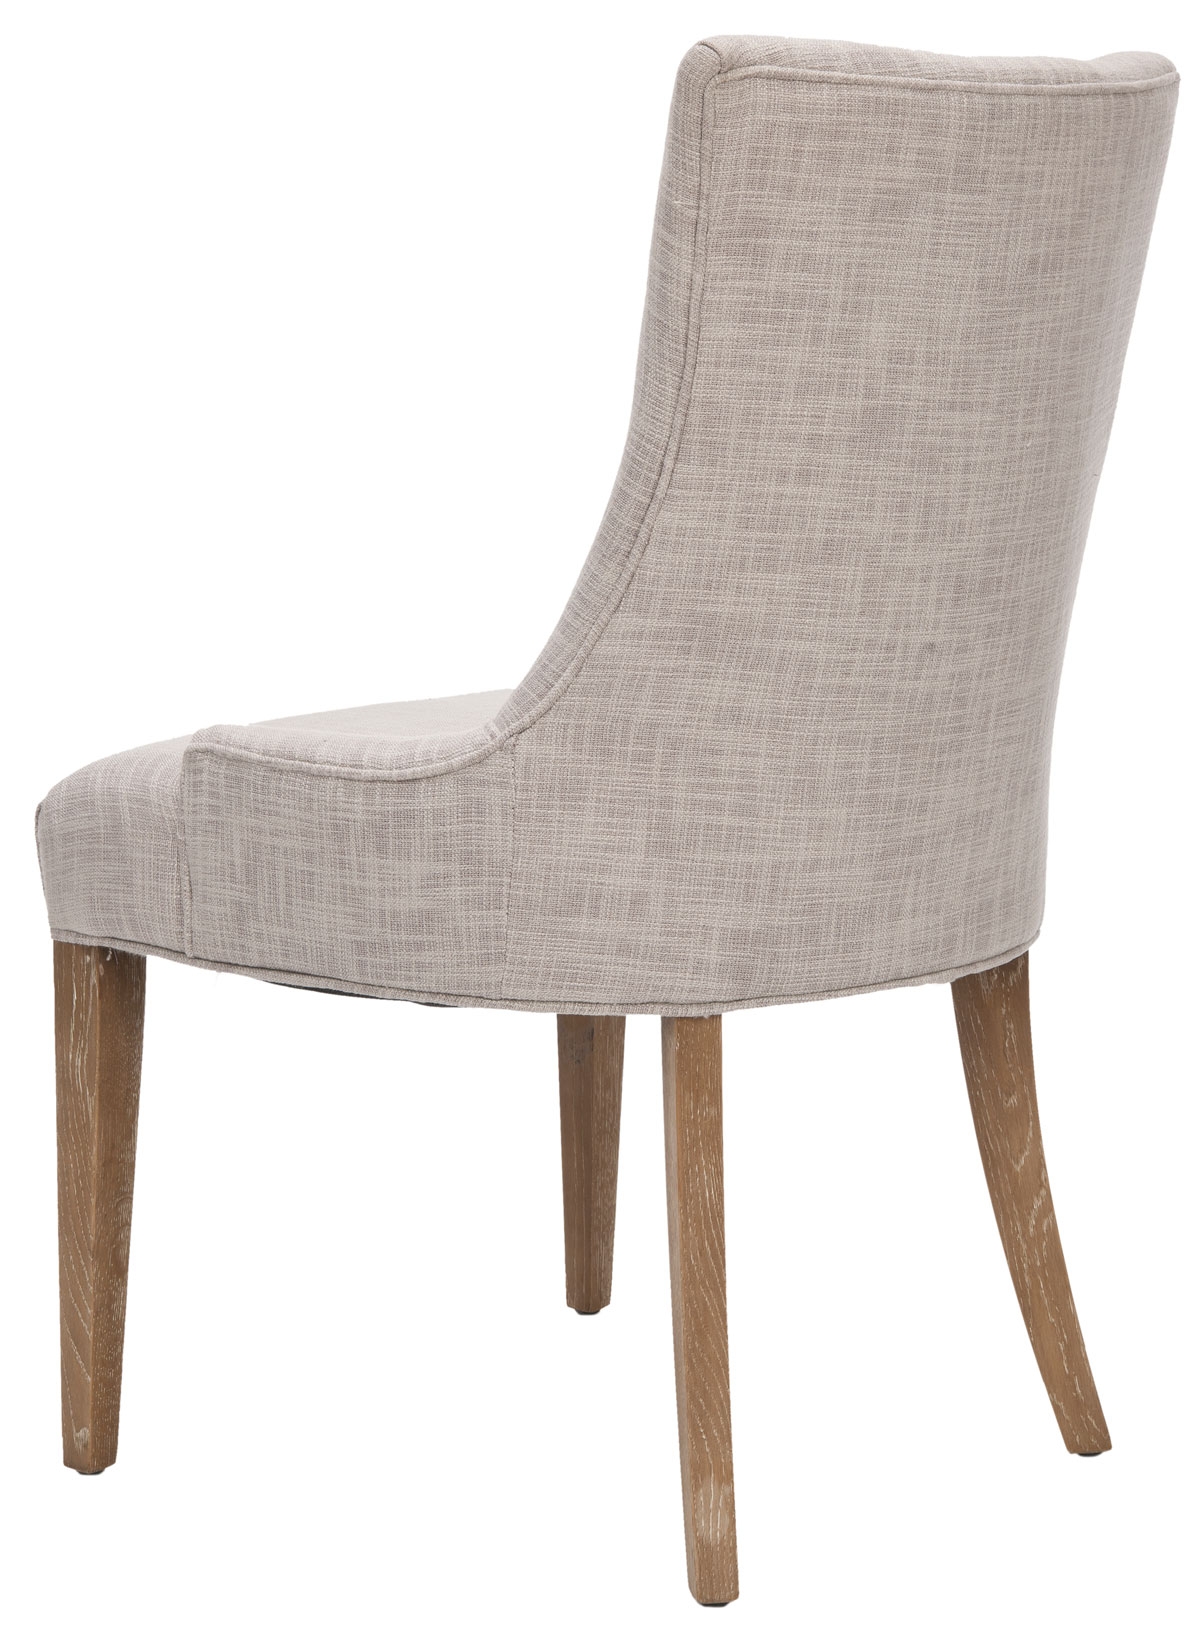 Becca 20''H Linen Dining Chair - Grey/White Washed - Safavieh - Image 2